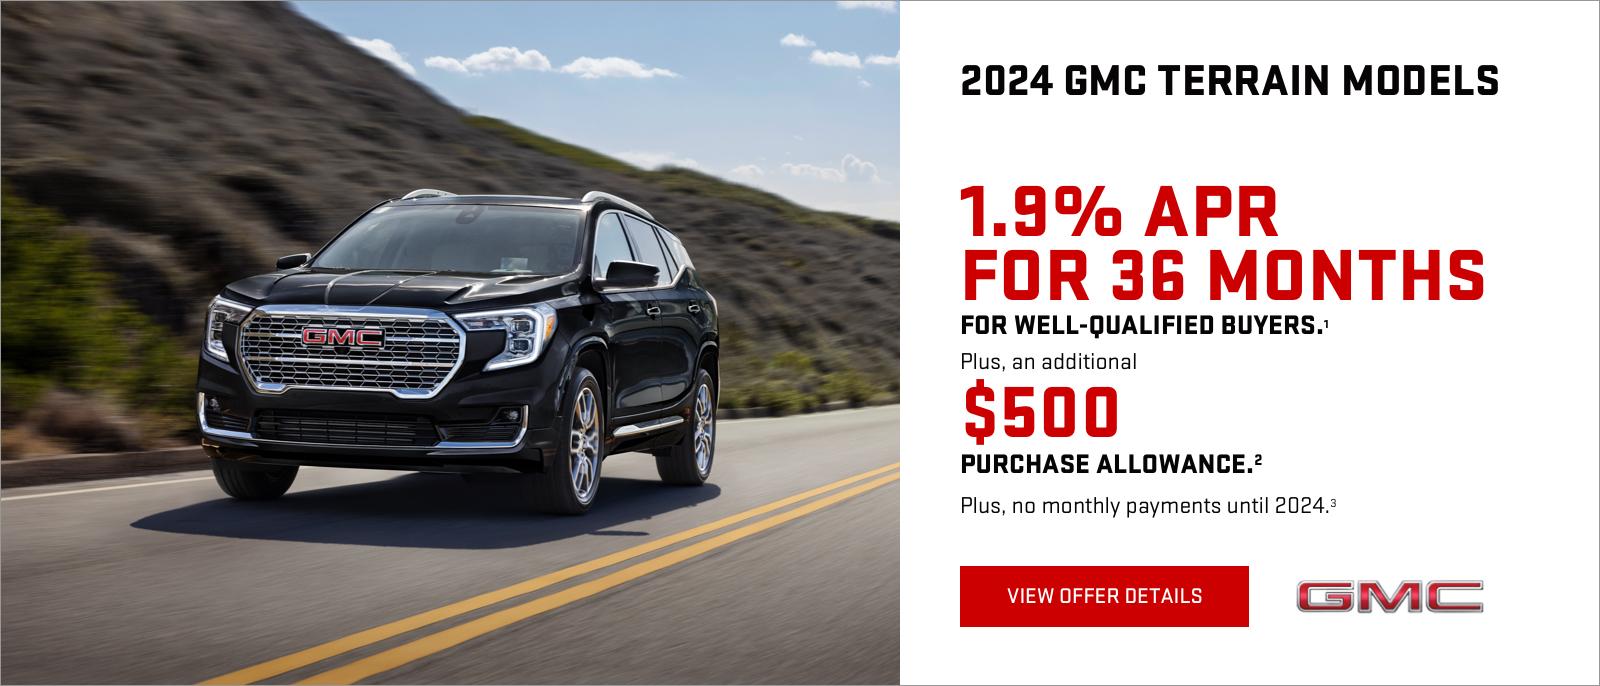 1.9% APR for 36 MONTHS for well-qualified buyers.1

Plus, receive an additional $500 PURCHASE ALLOWANCE.2

PLUS, NO MONTHLY PAYMENTS UNTIL 2024. 3